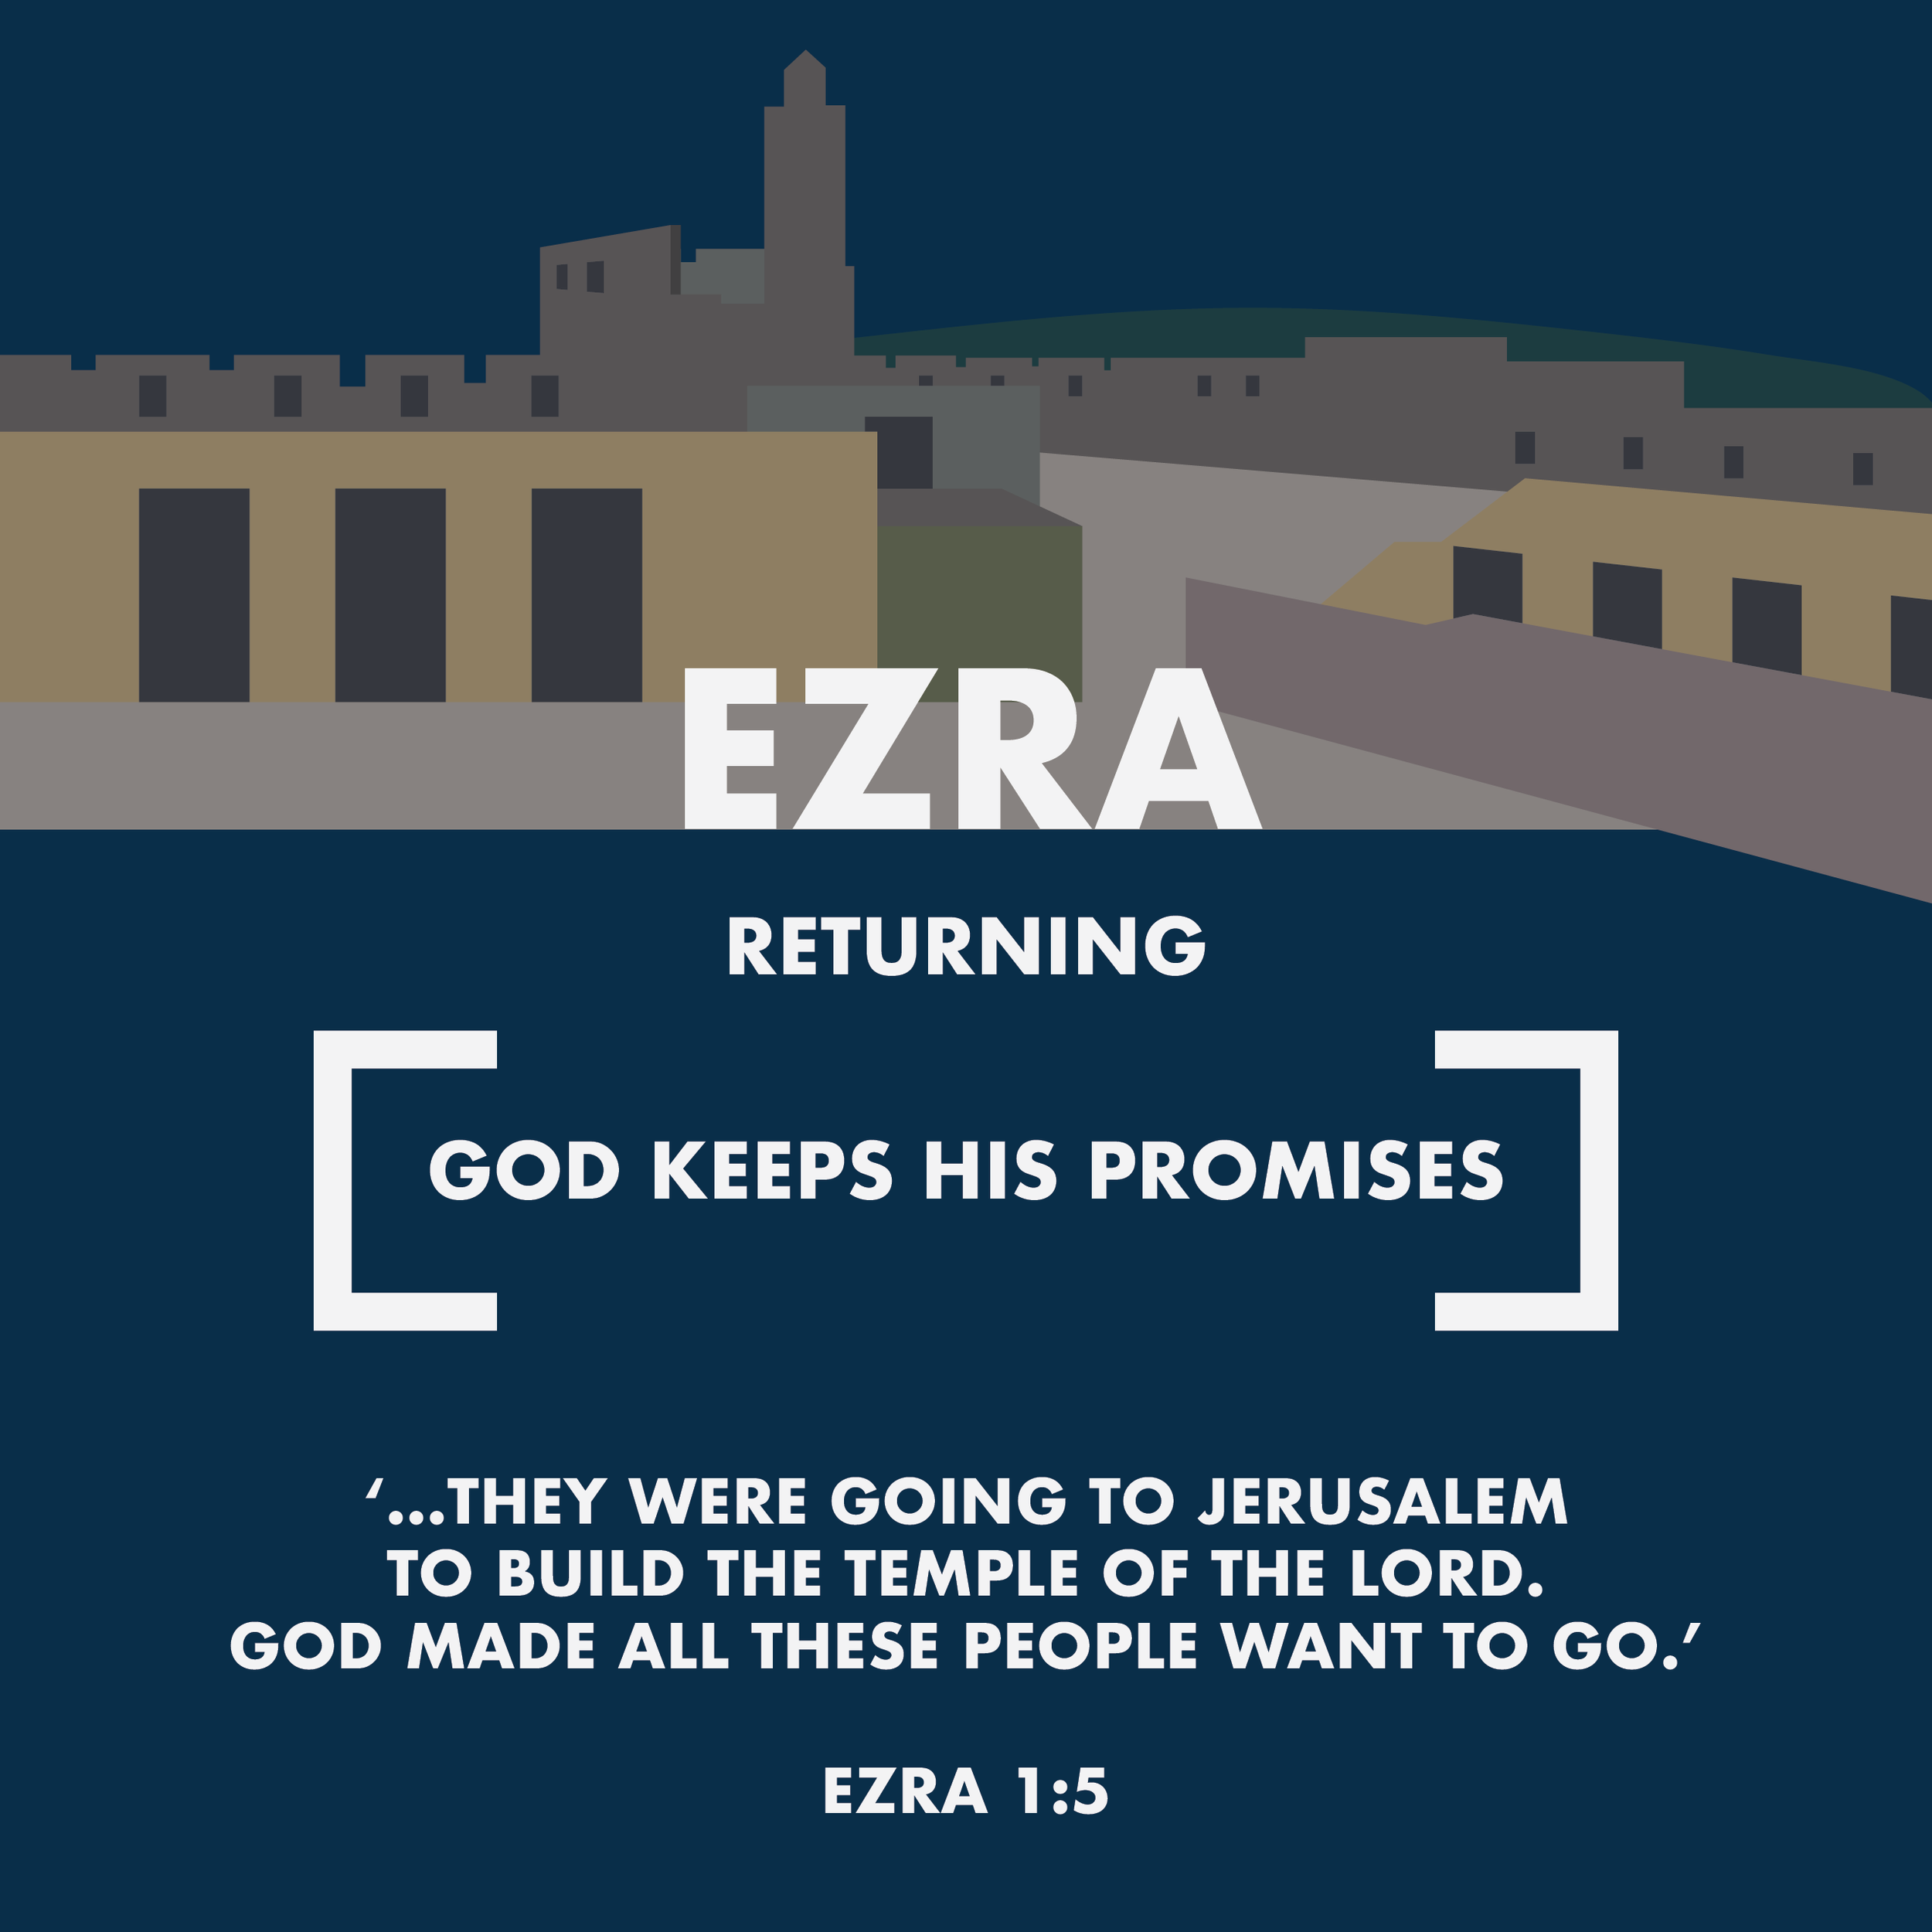 Books of the Bible_posters_13 Ezra.png